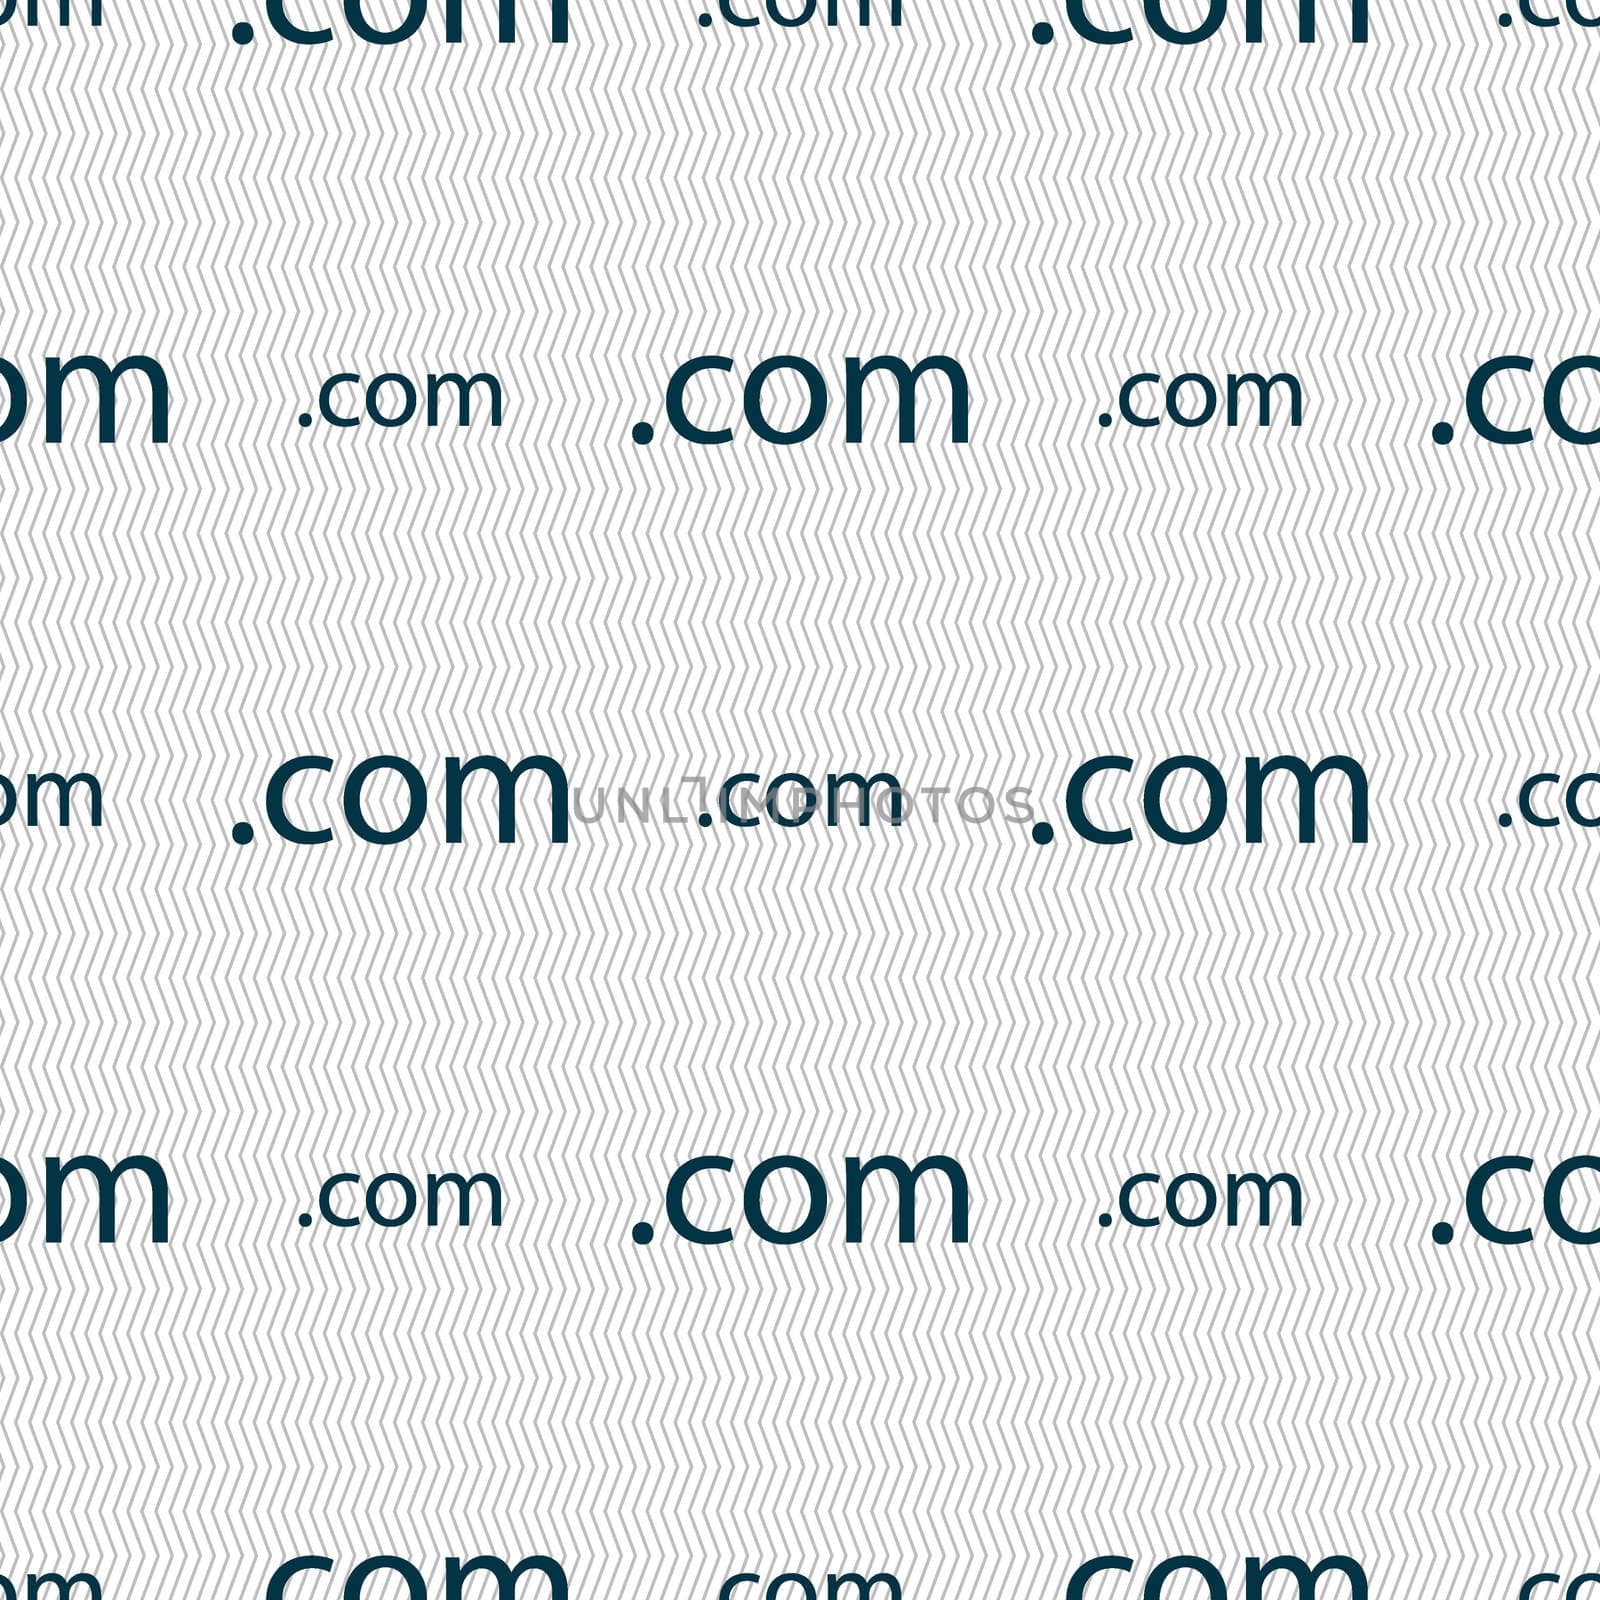 Domain COM sign icon. Top-level internet domain symbol. Seamless abstract background with geometric shapes. illustration